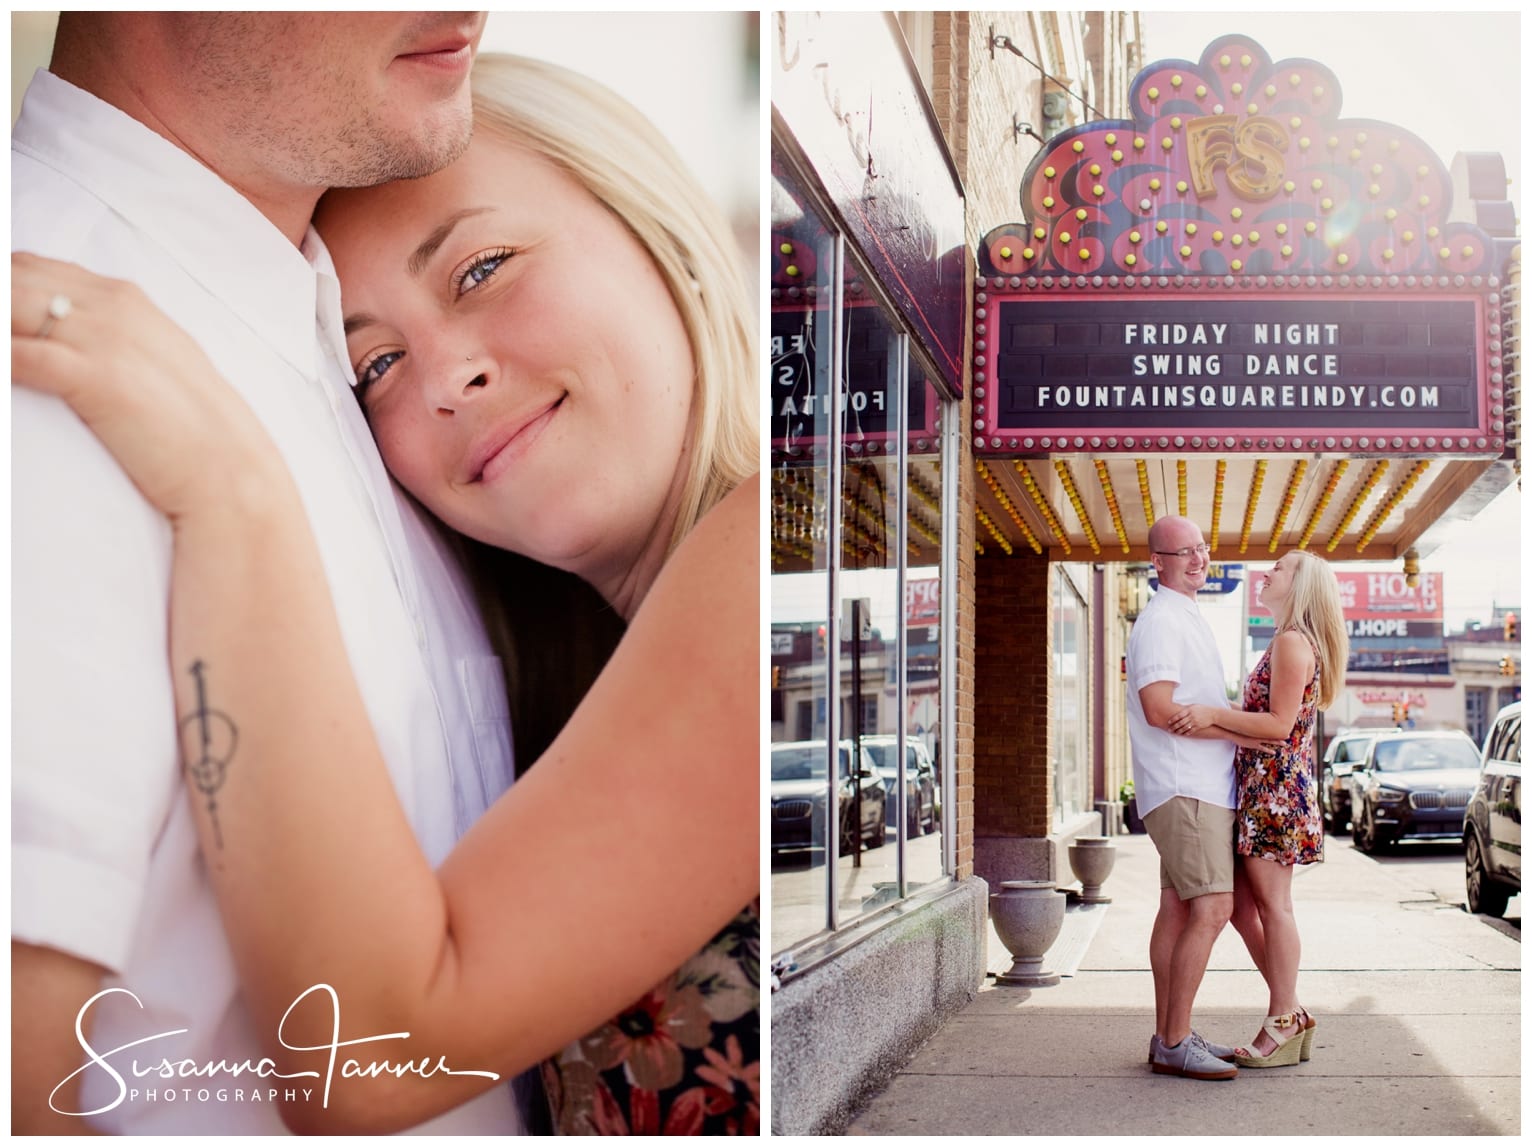 Fountain Square Indianapolis Photography Engagement Session Couple standing in front of theatre marque